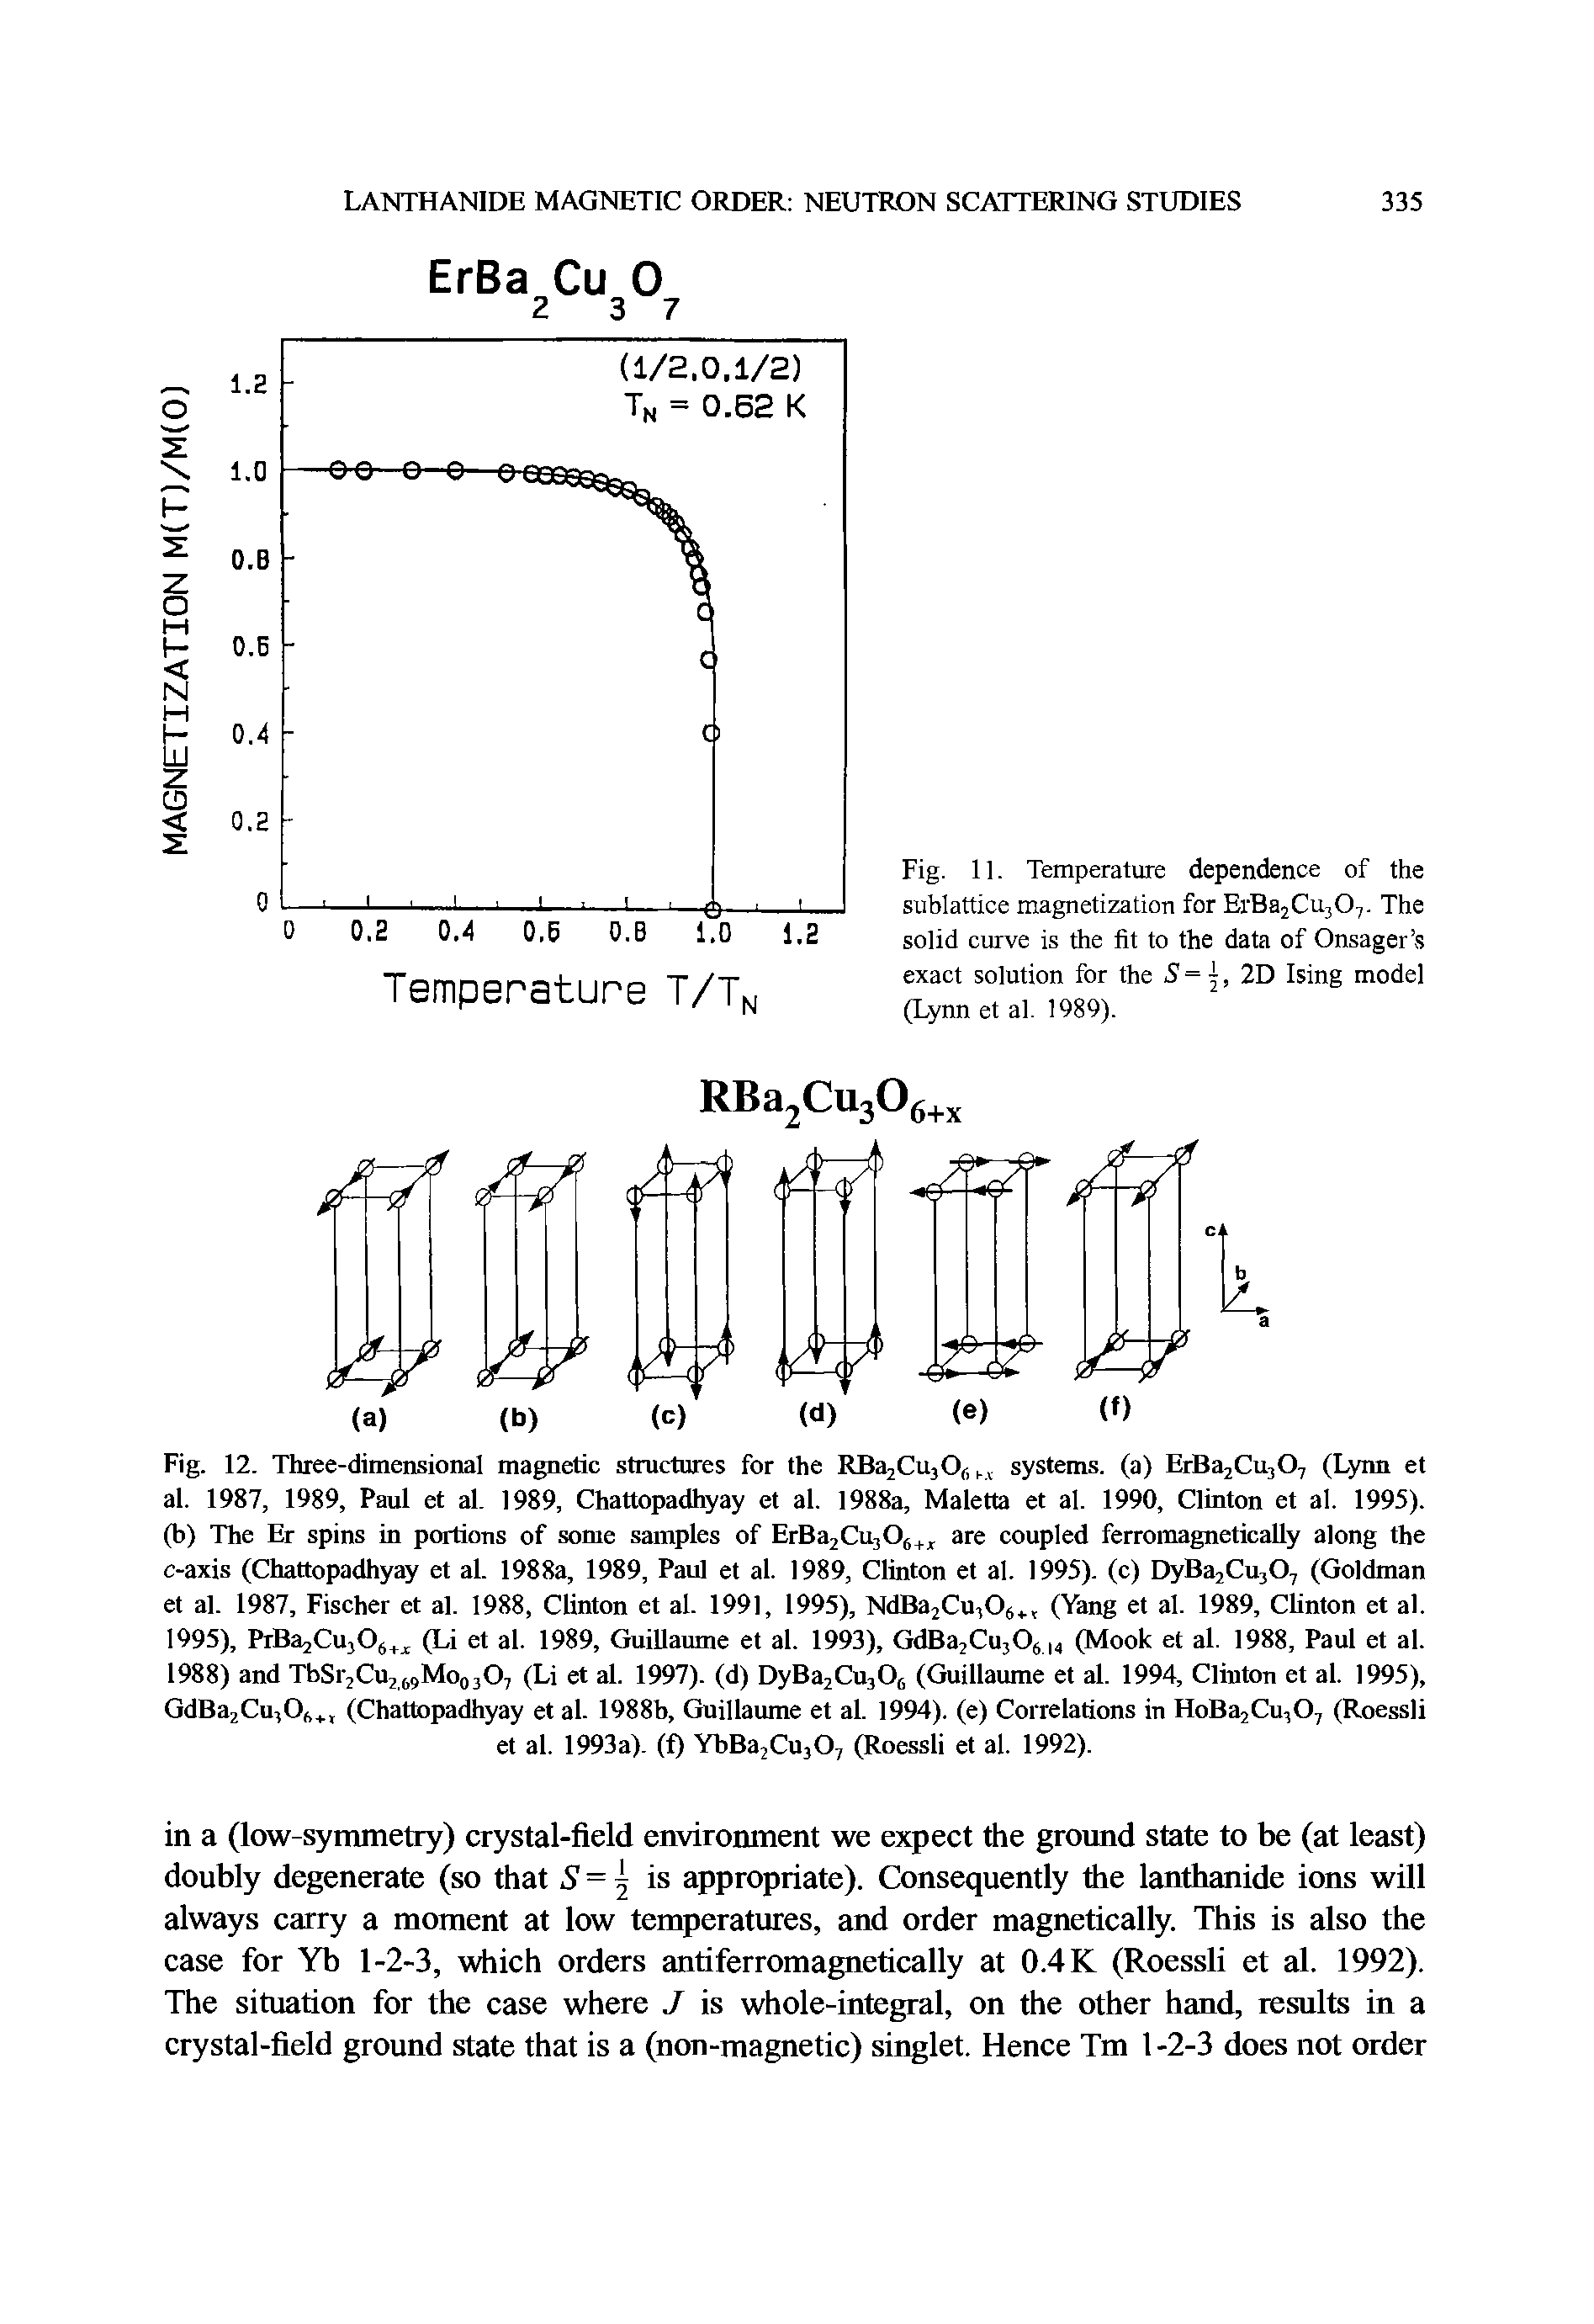 Fig. 11. Temperature dependence of the sublattice magnetization for ErBa2Cu307. The solid curve is the fit to the data of Onsager s exact solution for the 5= 5, 2D Ising model (Lynn et al. 1989).